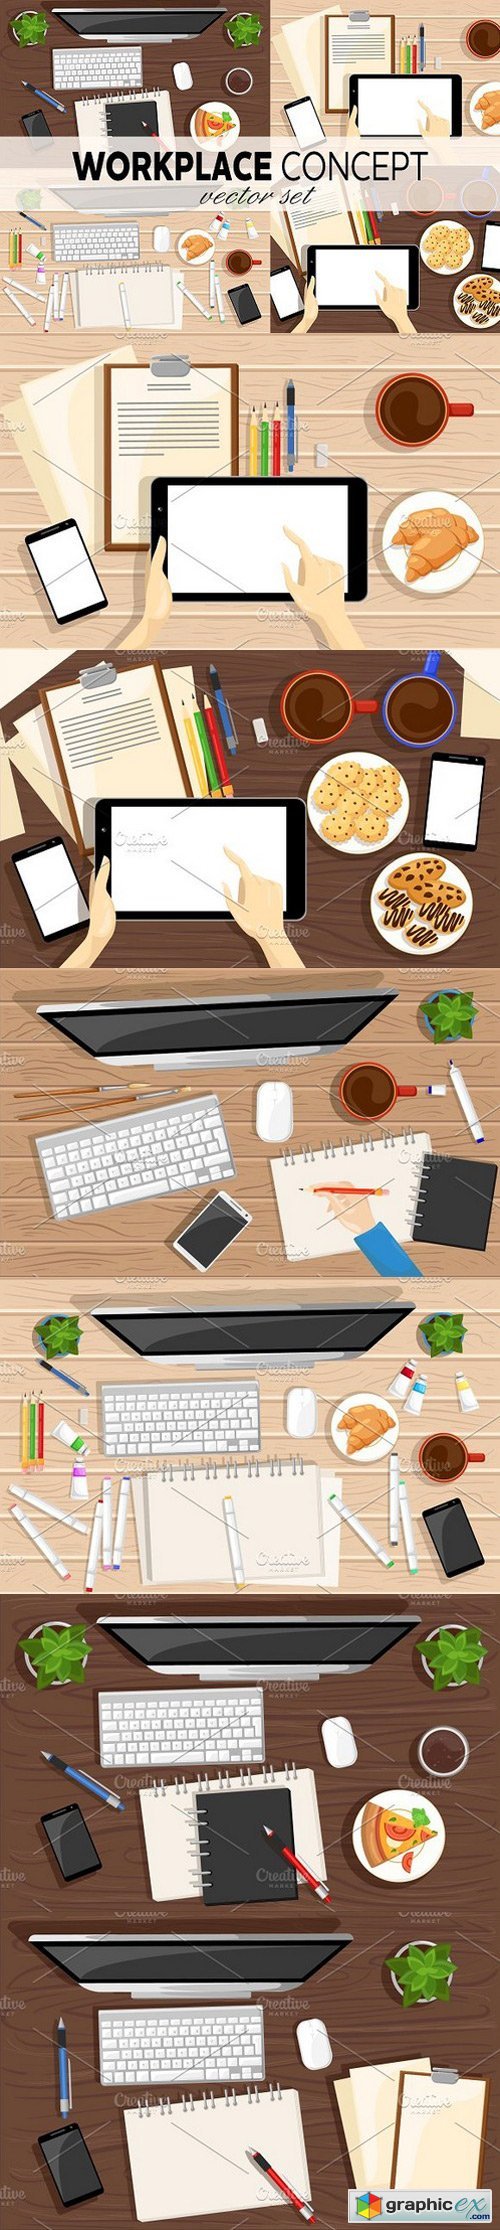 Workplace concept vector set